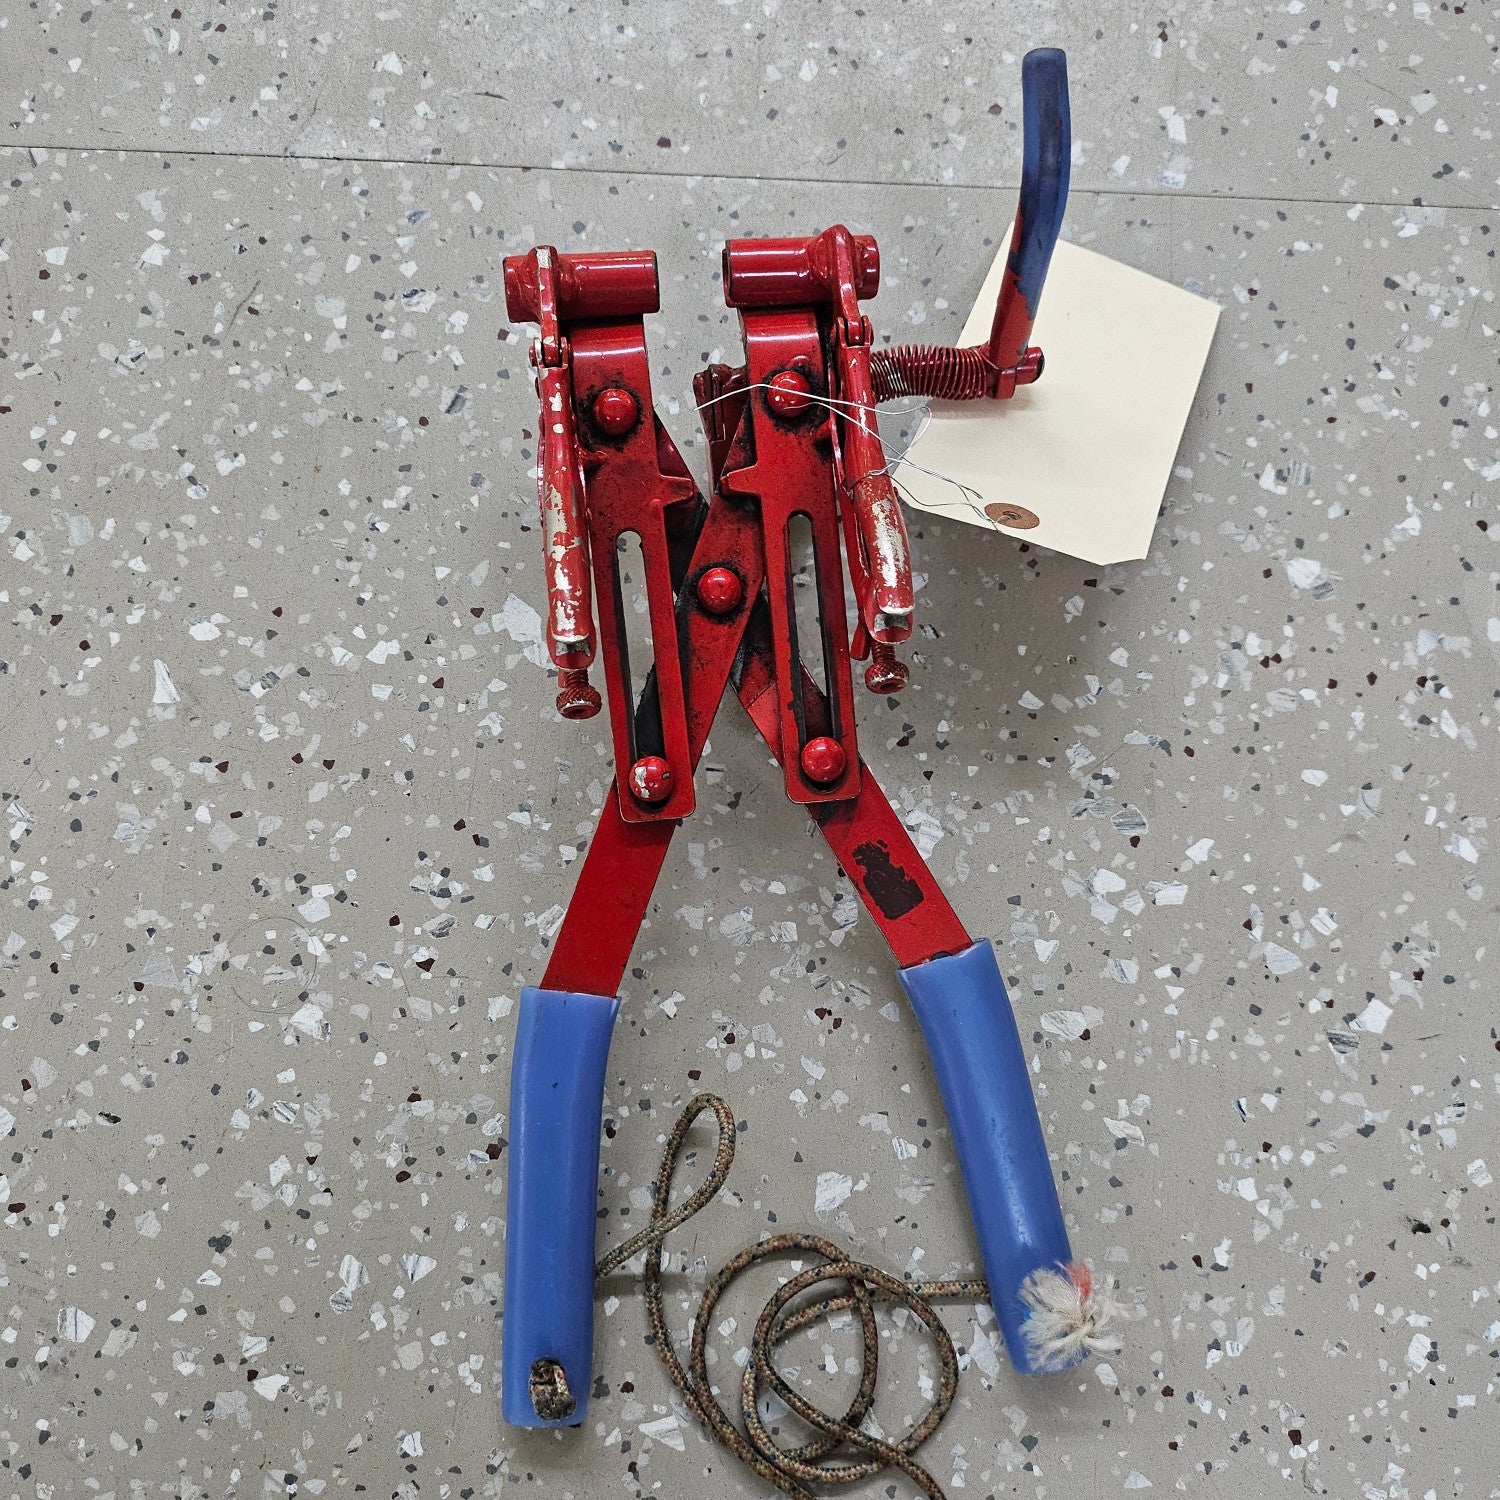 Used Two Hand Tubing Tool for 3/16" Tubing